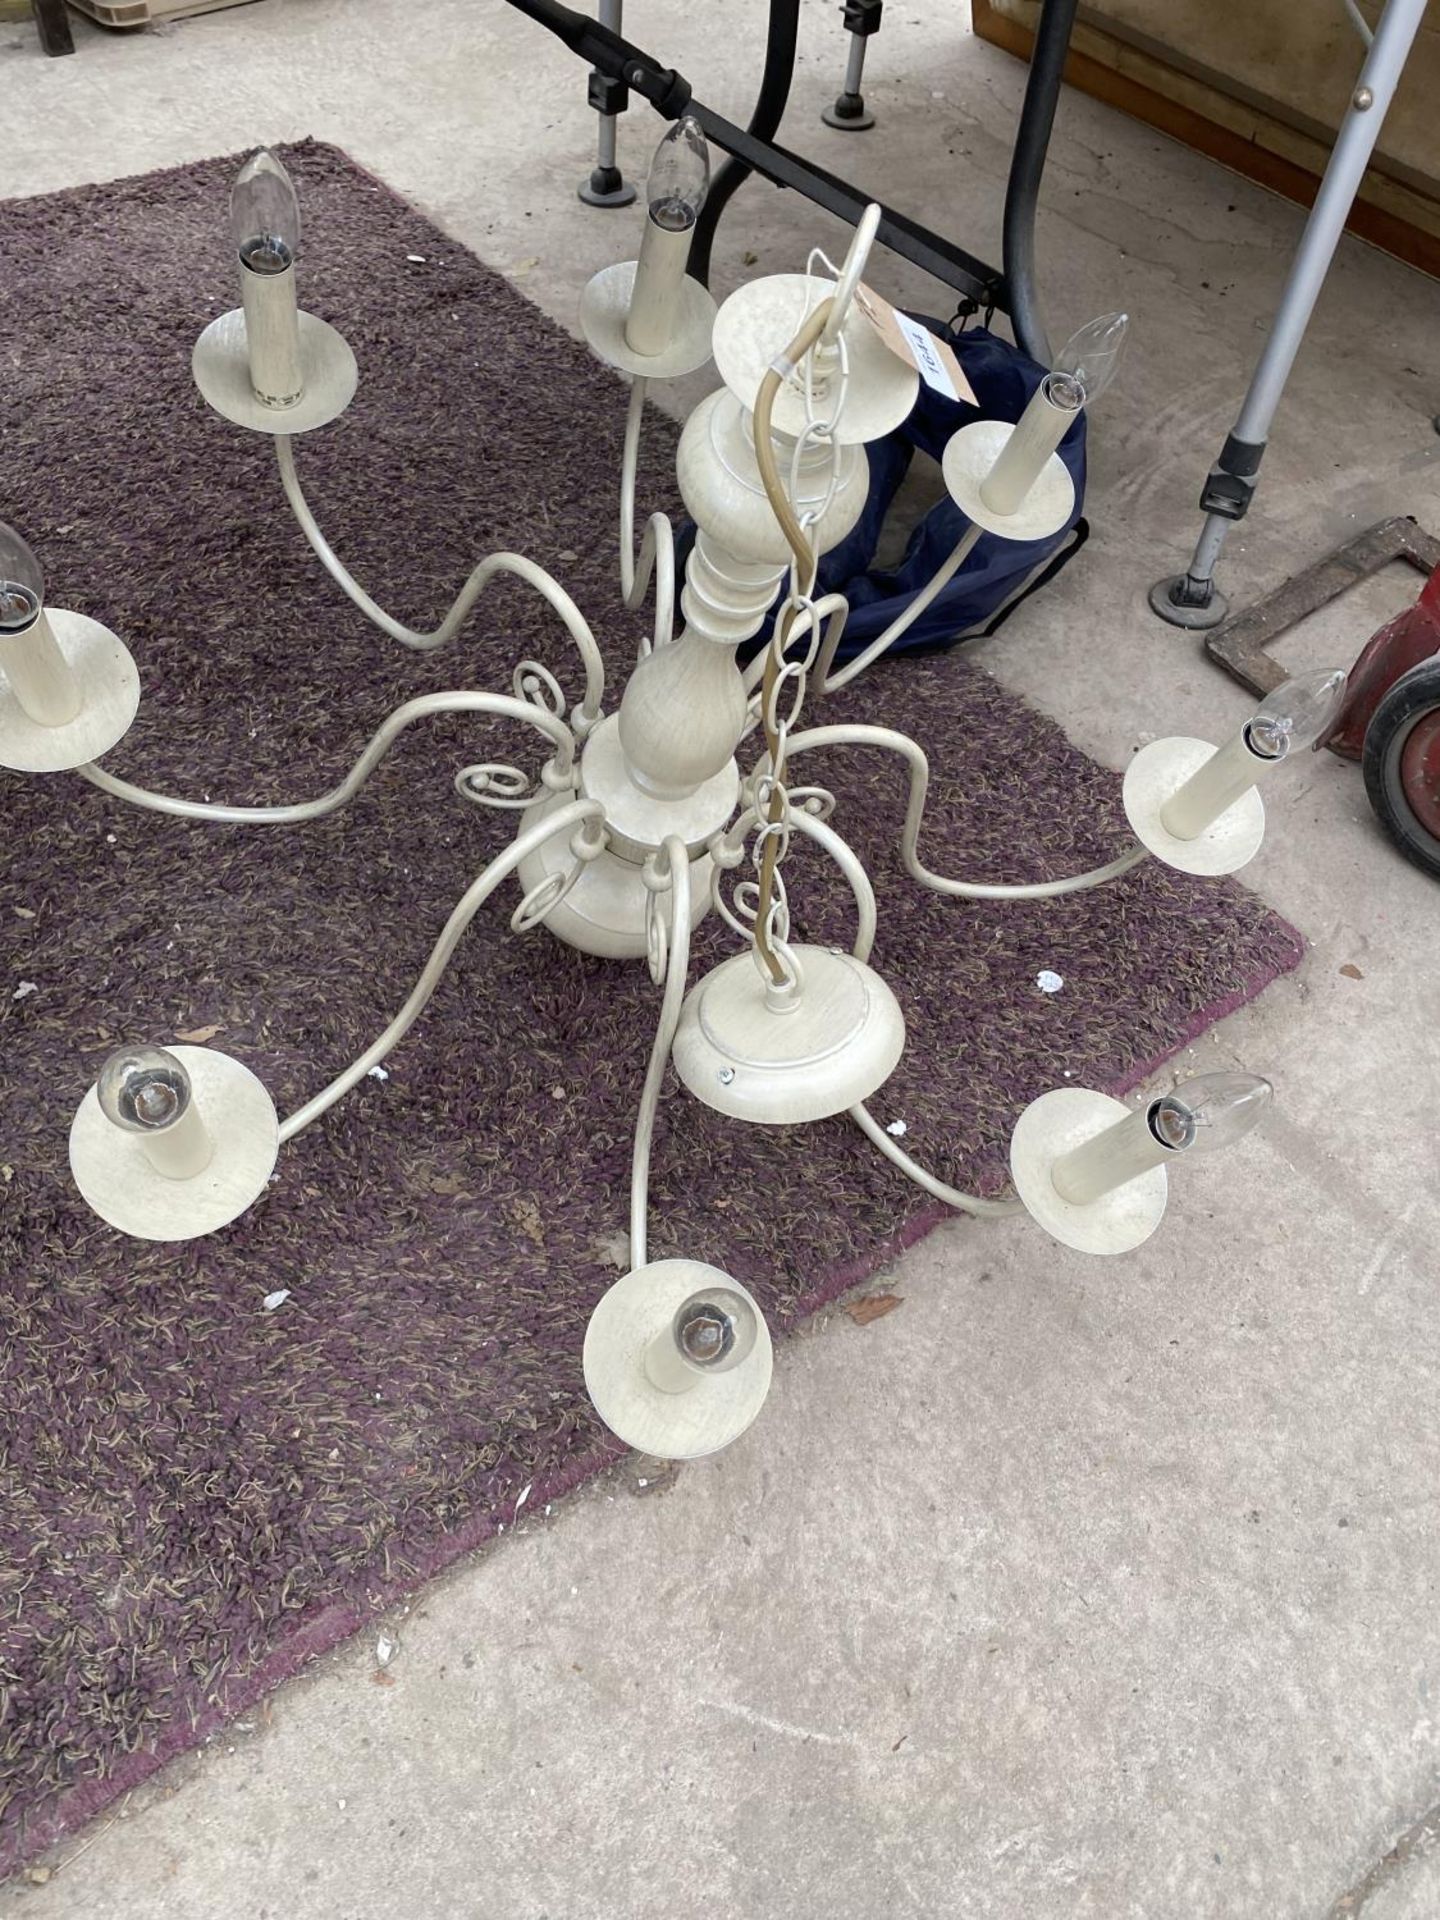 AN EIGHT BRANCH CEILING LIGHT FITTING